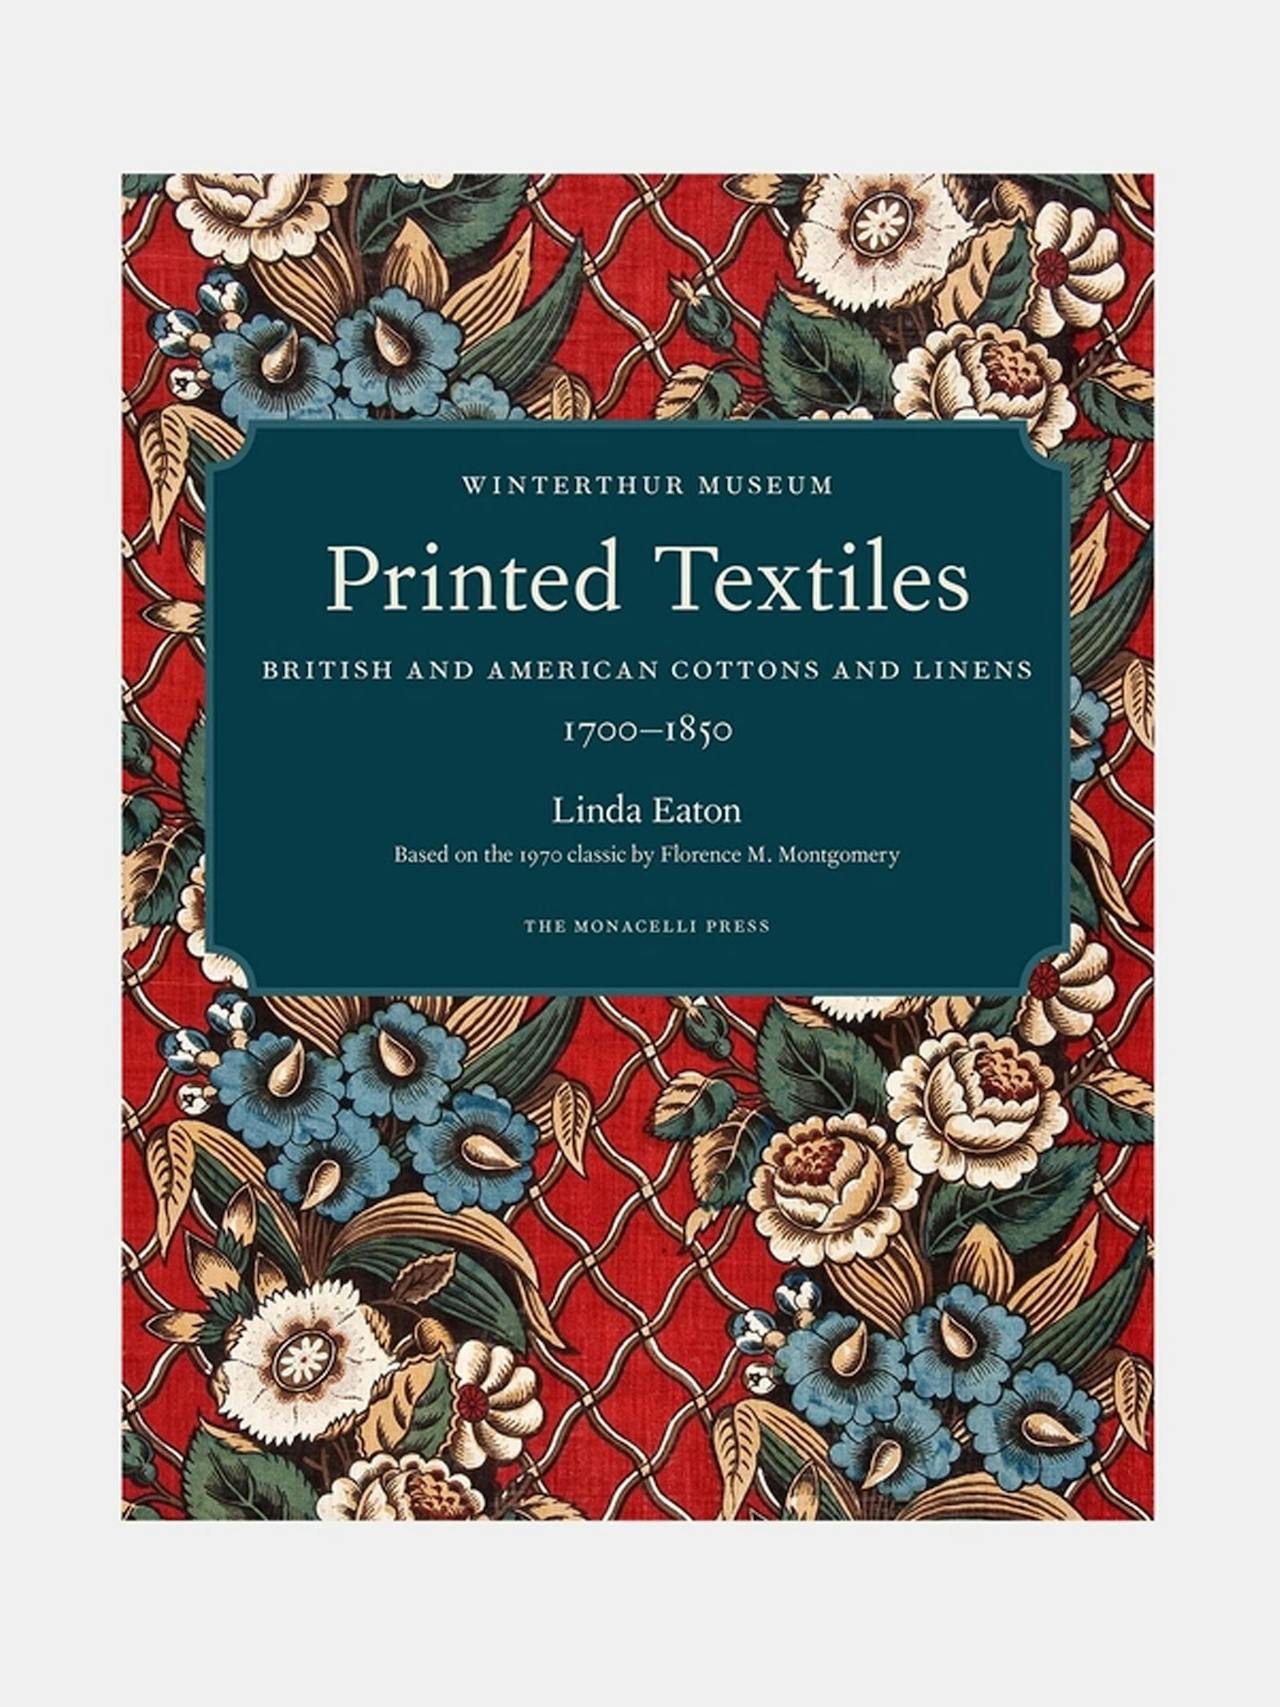 Printed Textiles: British and American Cottons and Linens 1700-1850